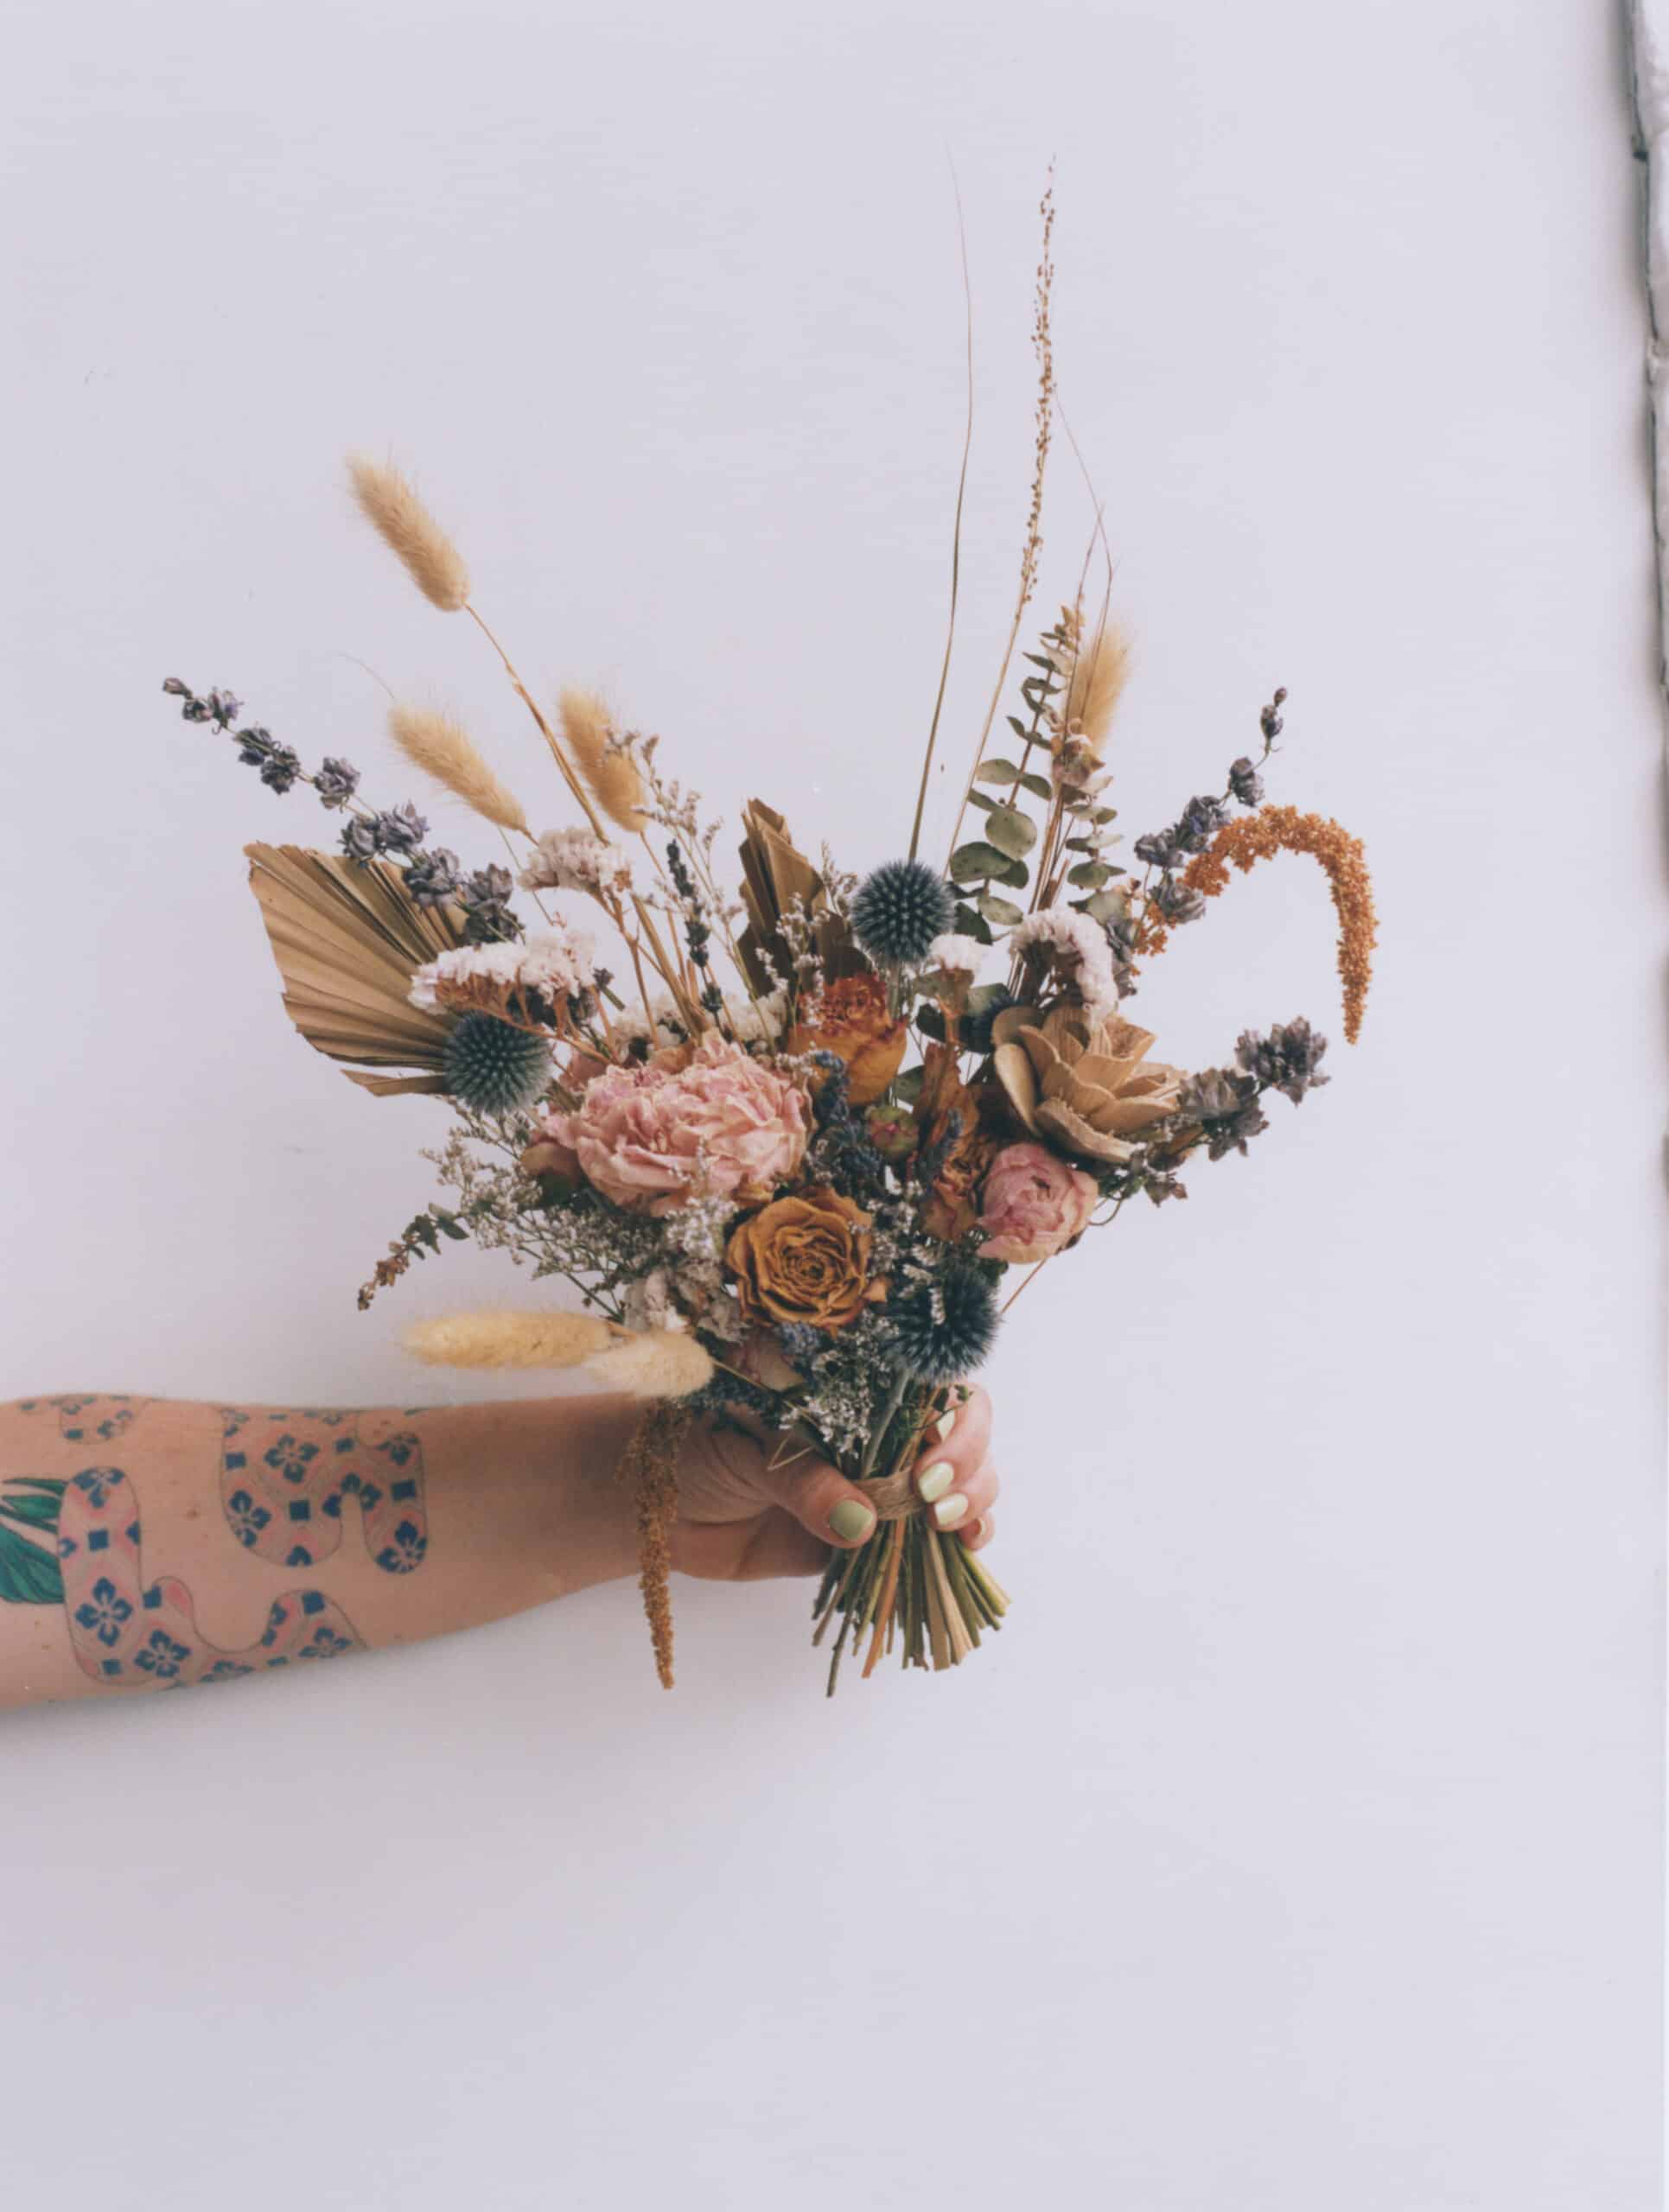 Dry Flower Boutonniere